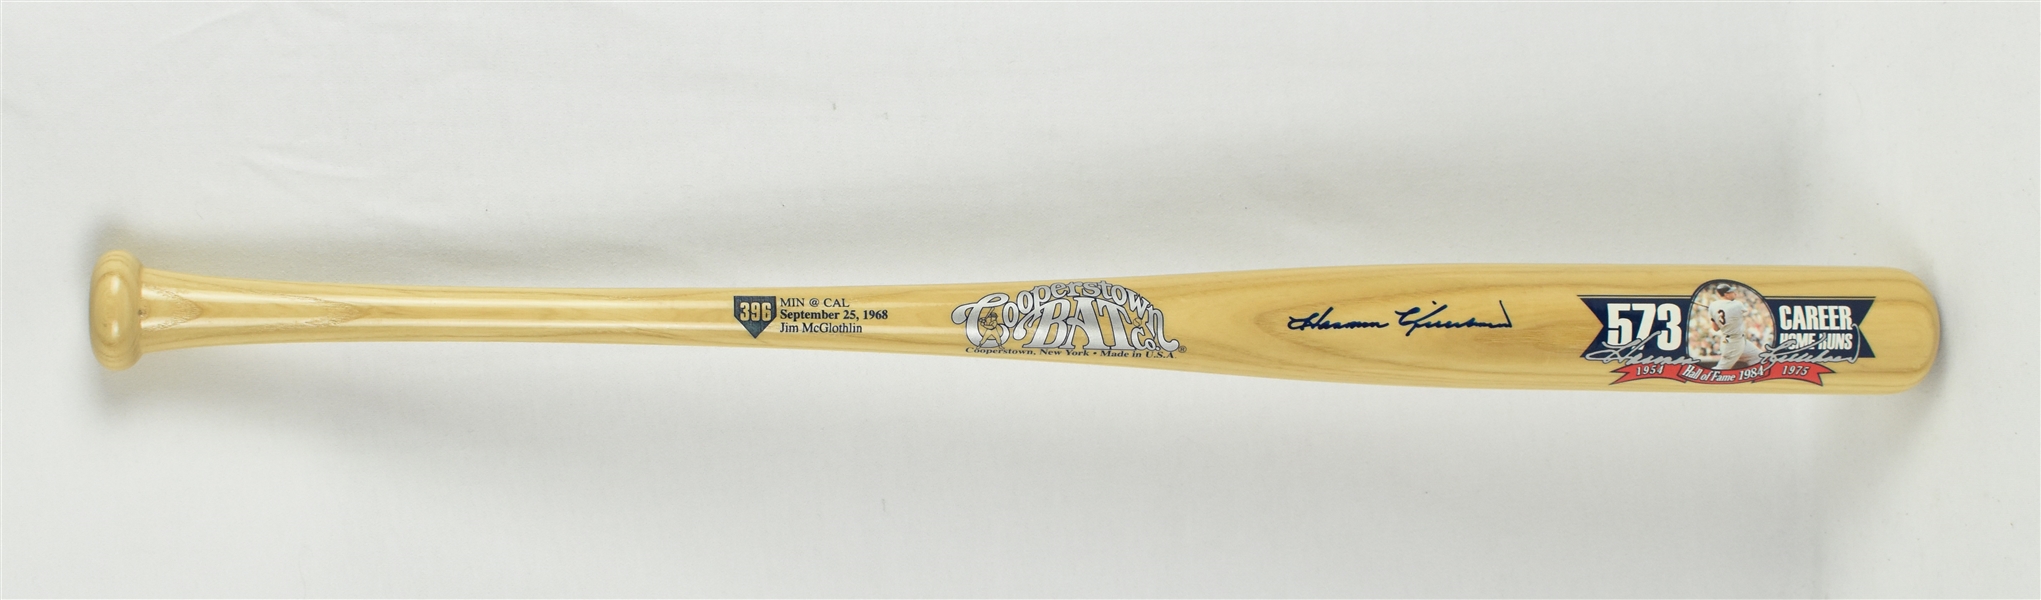 Harmon Killebrew Autographed Limited Edition Cooperstown Collection HR #396  Bat